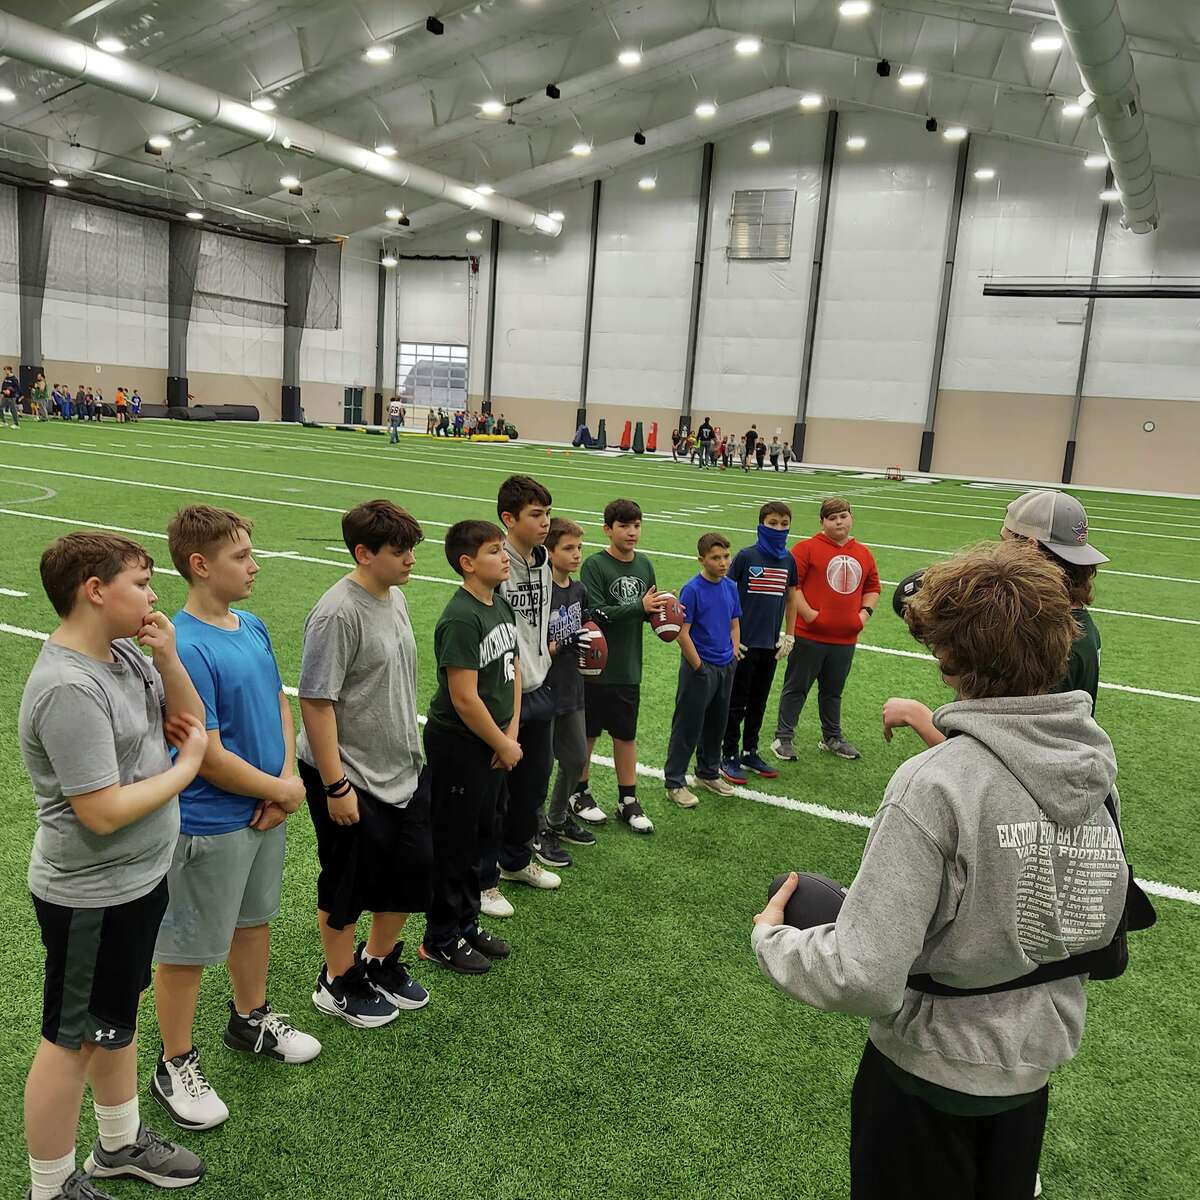 The Laker football team held their Christmas camp on Dec. 14, 2021. They will be holding a camp on Friday, June 3, 2022.